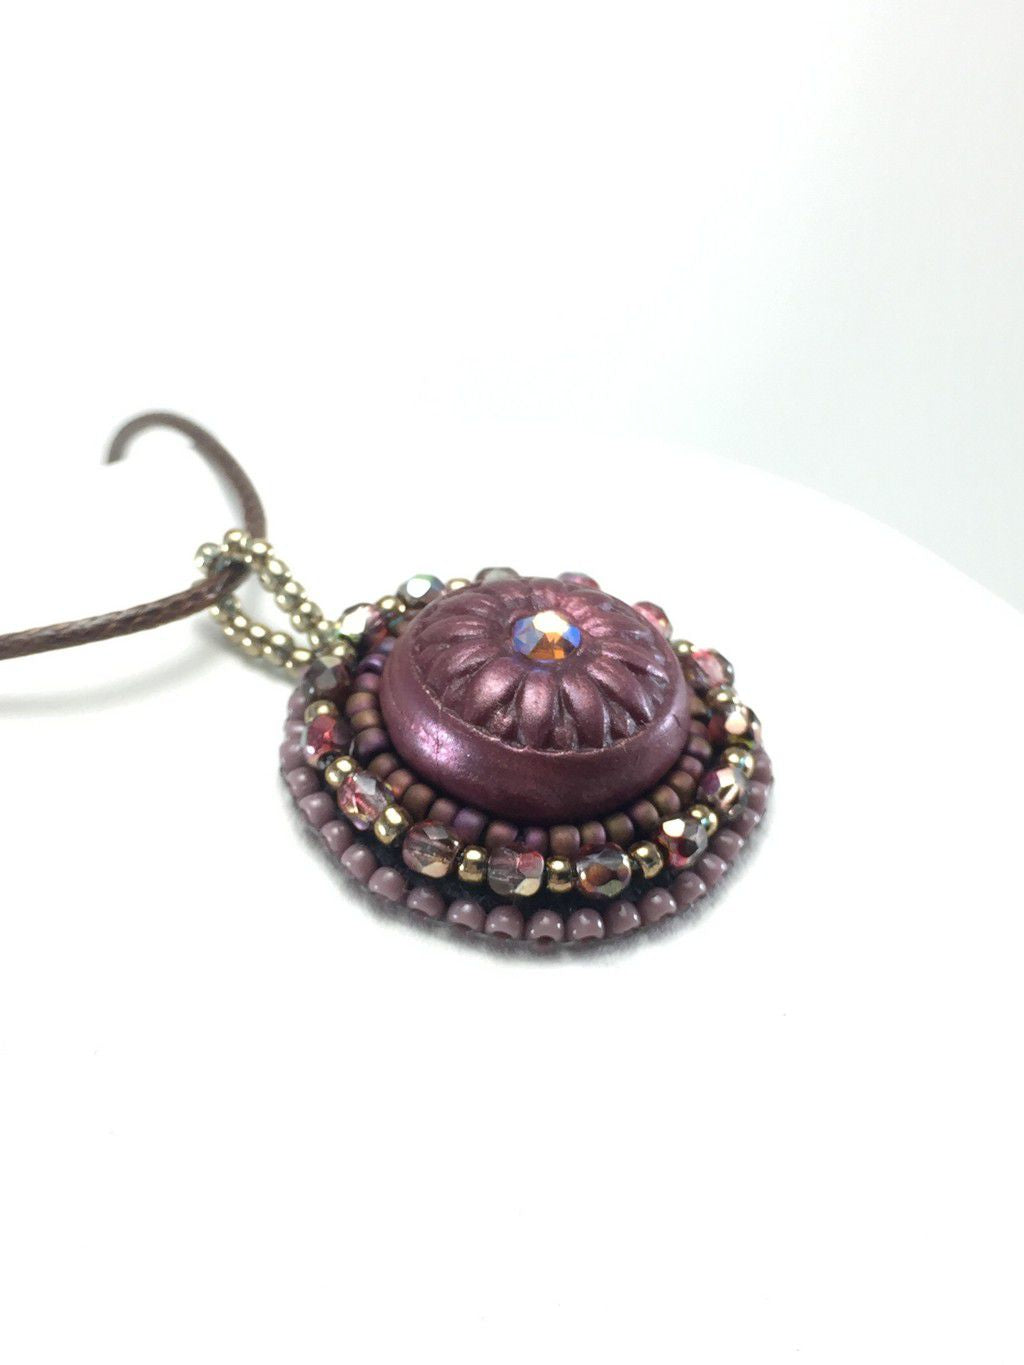 Tidy burgandy and gold daisy pendant with crystal center stone